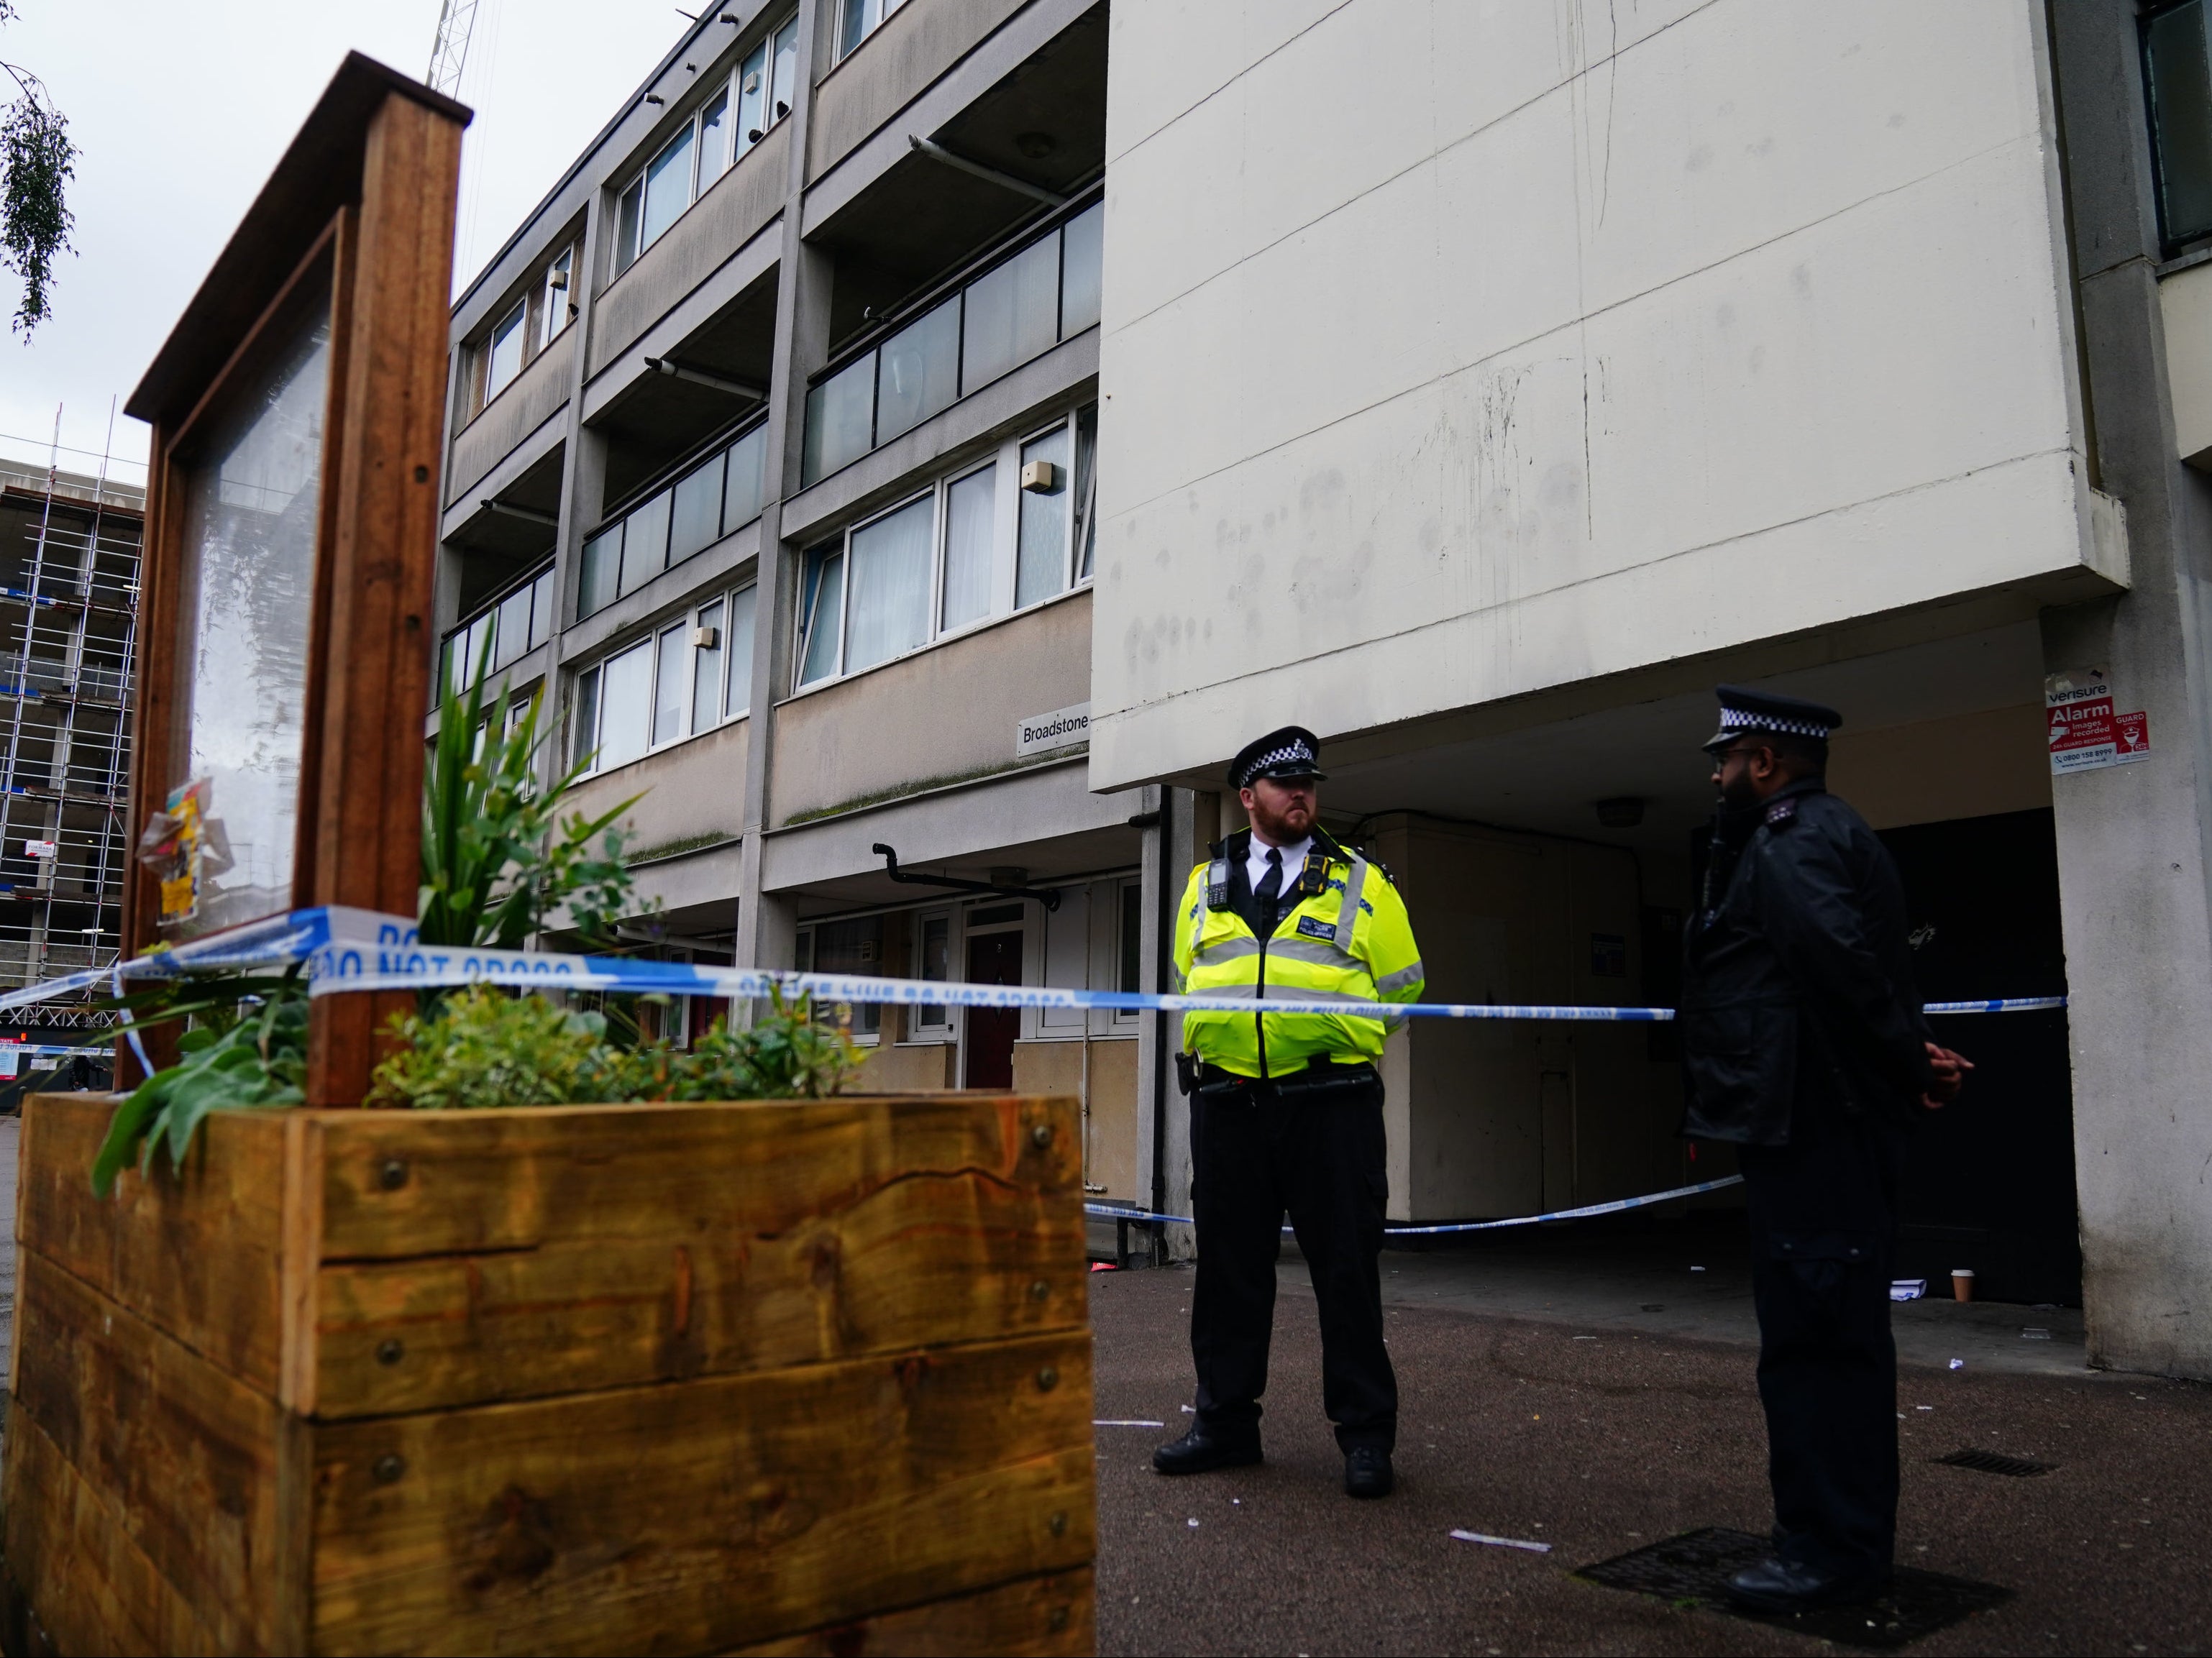 Police at the scene in Oval Place, Lambeth, south London, where a 16-year-old boy died after being stabbed on Monday evening